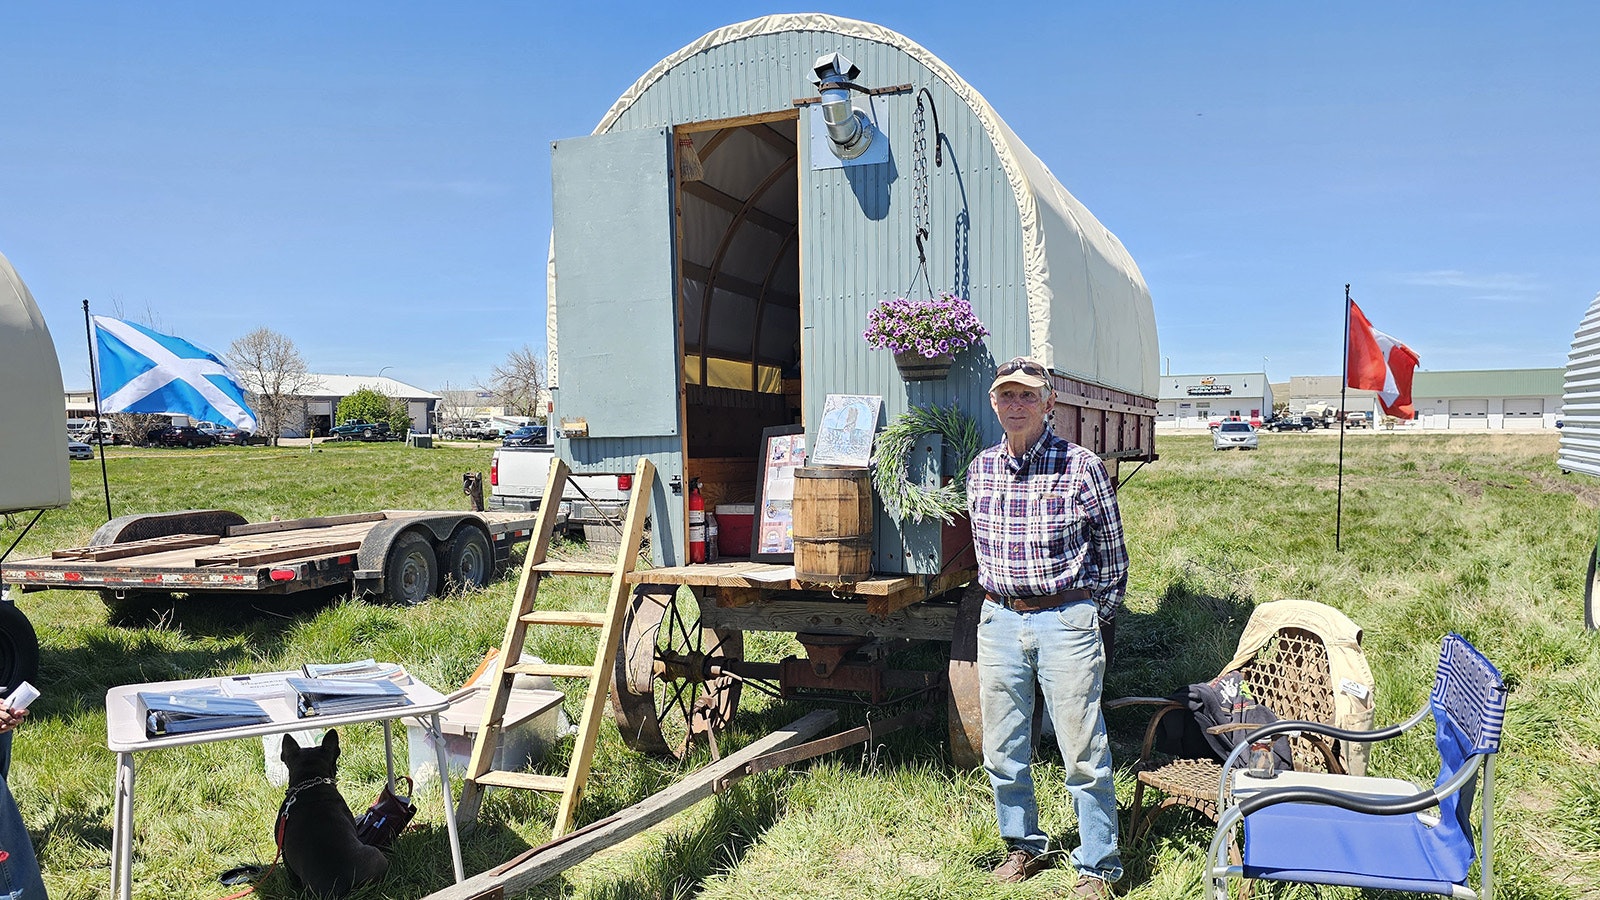 Sheep wagons are a Wyoming invention, and people were showing theirs off at Saturday's festival in Gillette